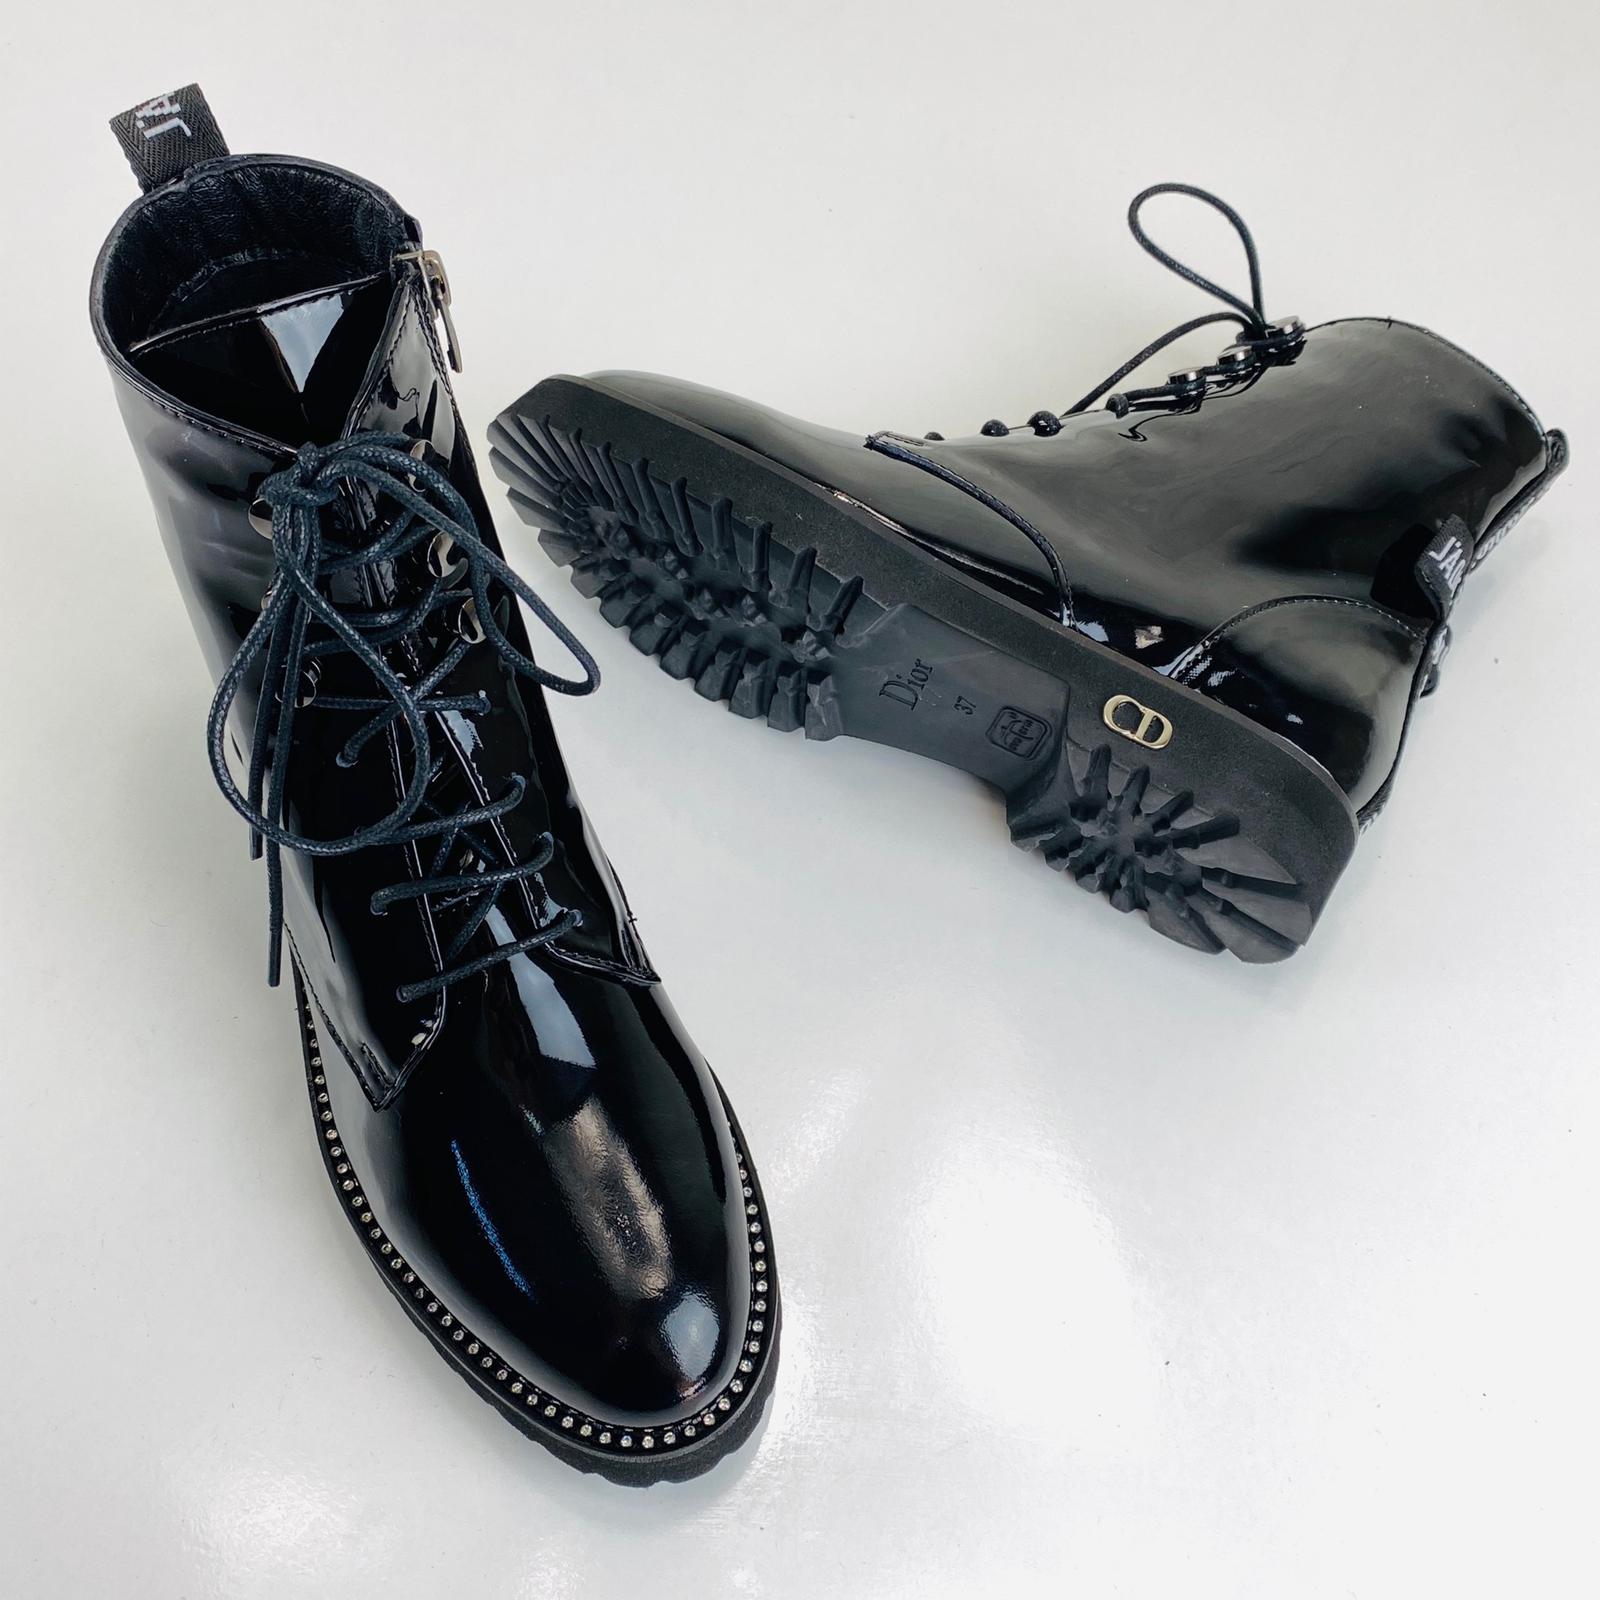 dior rebelle army boots